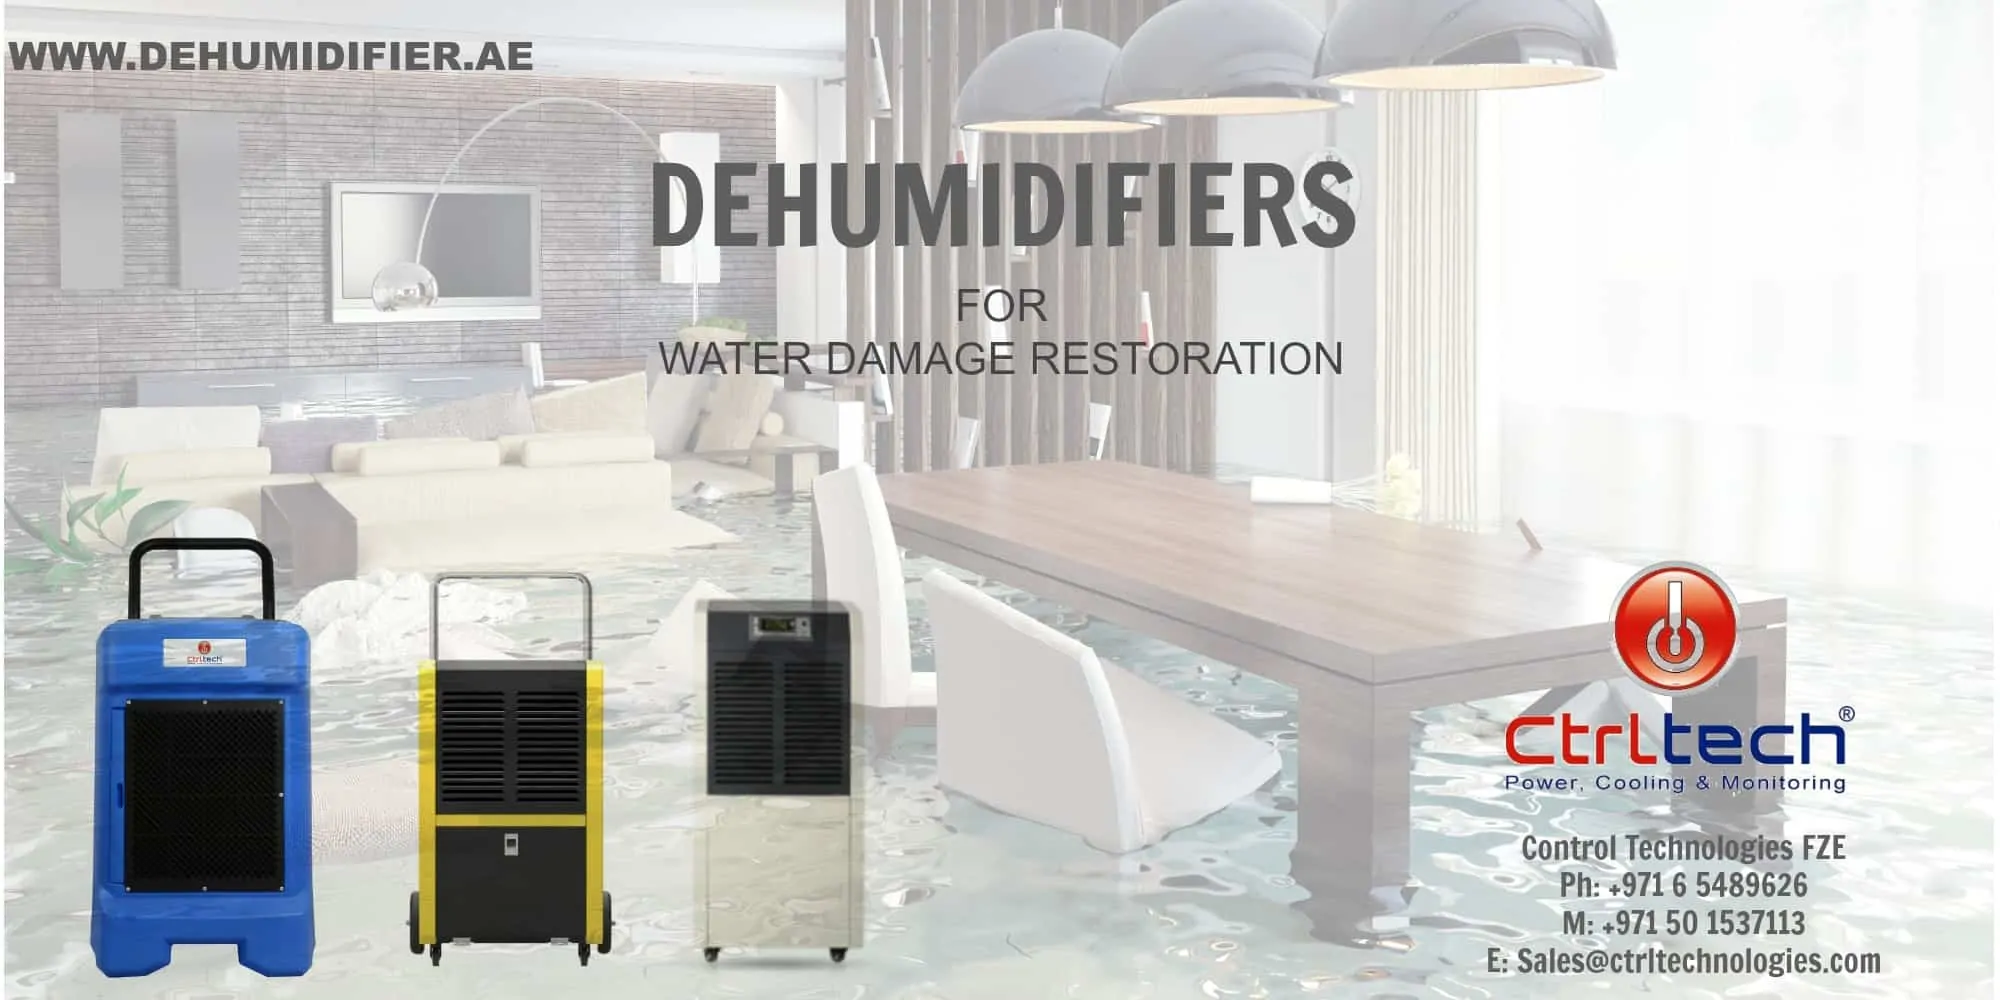 Dehumidifier and air movers for damage restoration.